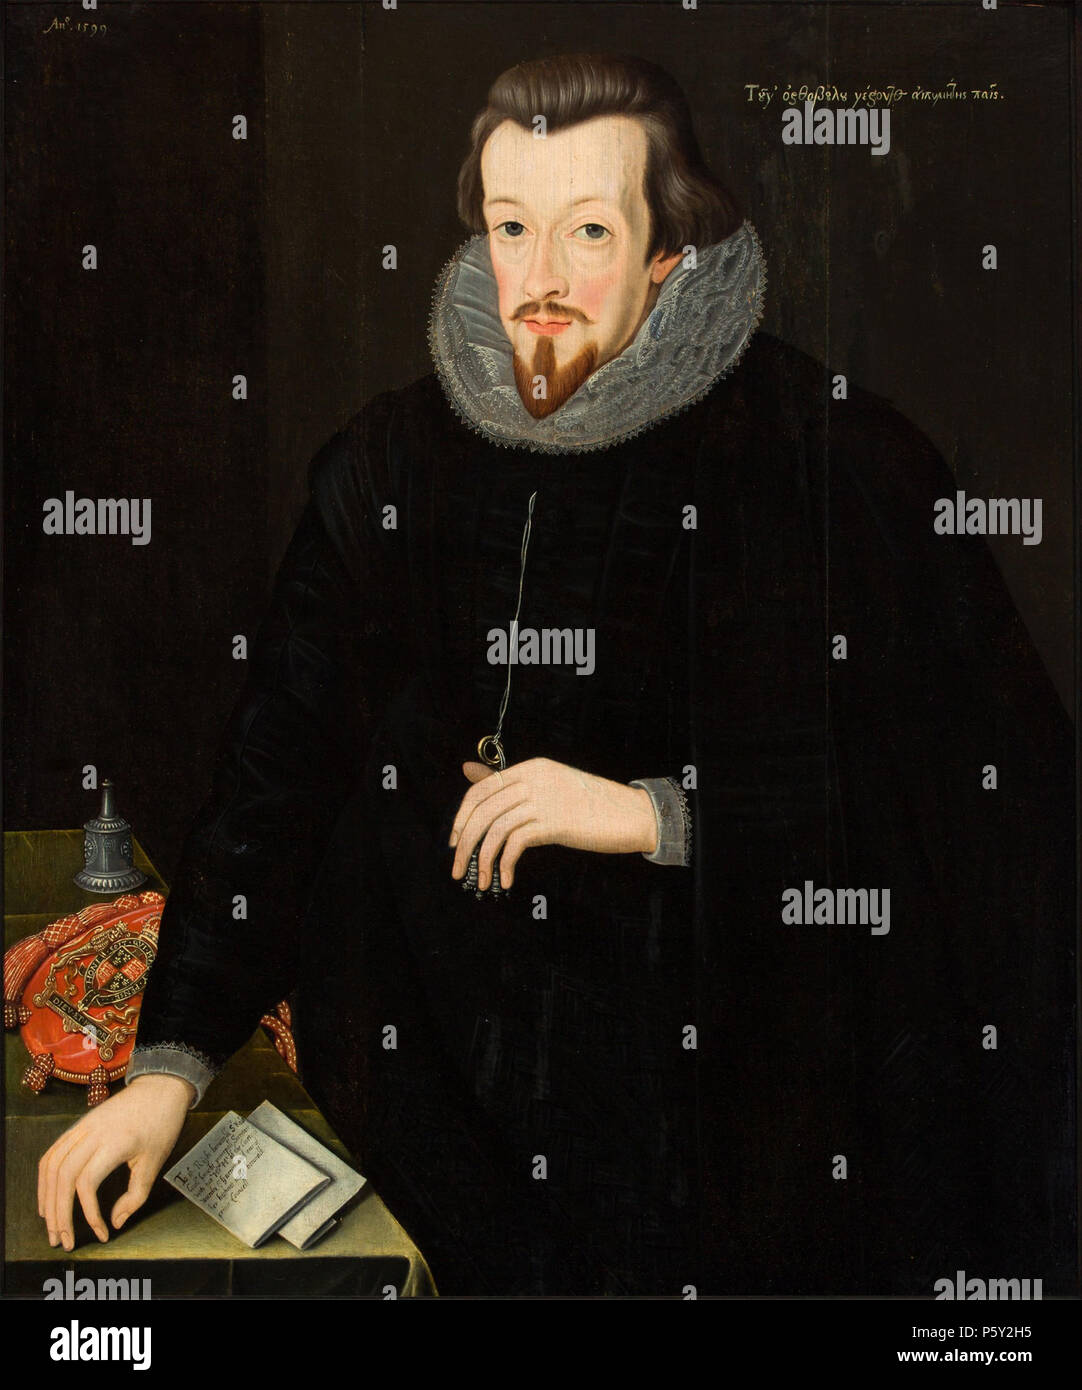 N/A. English: Portrait of Robert Cecil, 1st Earl of Salisbury (c. 1563-1612) three-quarter-length, dressed in black with a seal bag as Secretary of State attributed to John de Critz the Elder, 1599, oil on panel, 88.3 x 73 cm. 1599. attributed to John de Critz the Elder 391 Portrait of Robert Cecil, 1st Earl of Salisbury attributed to John de Critz the Elder, 1599 Stock Photo